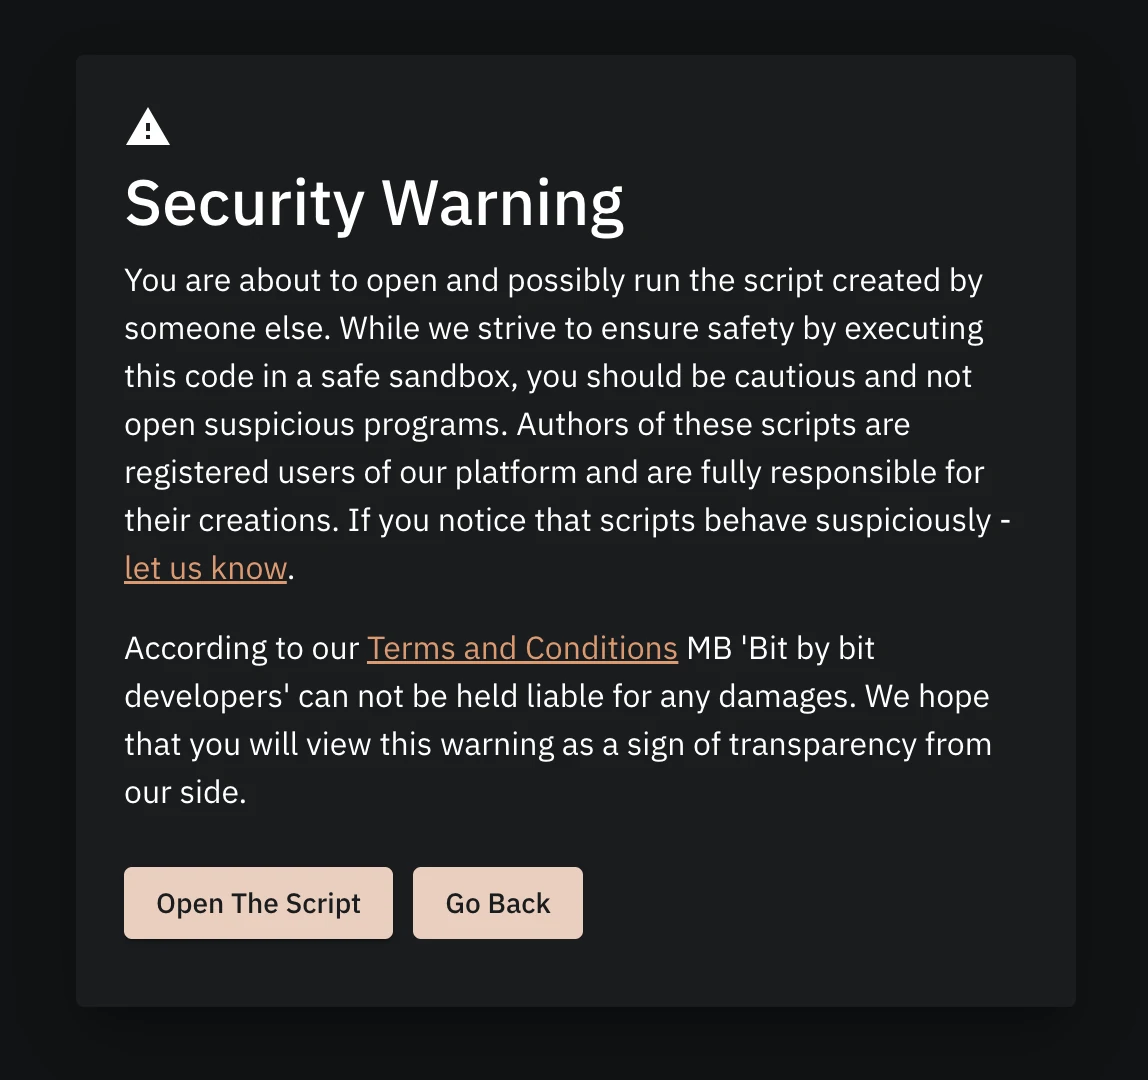 Security warning of the script in Bit by bit developers